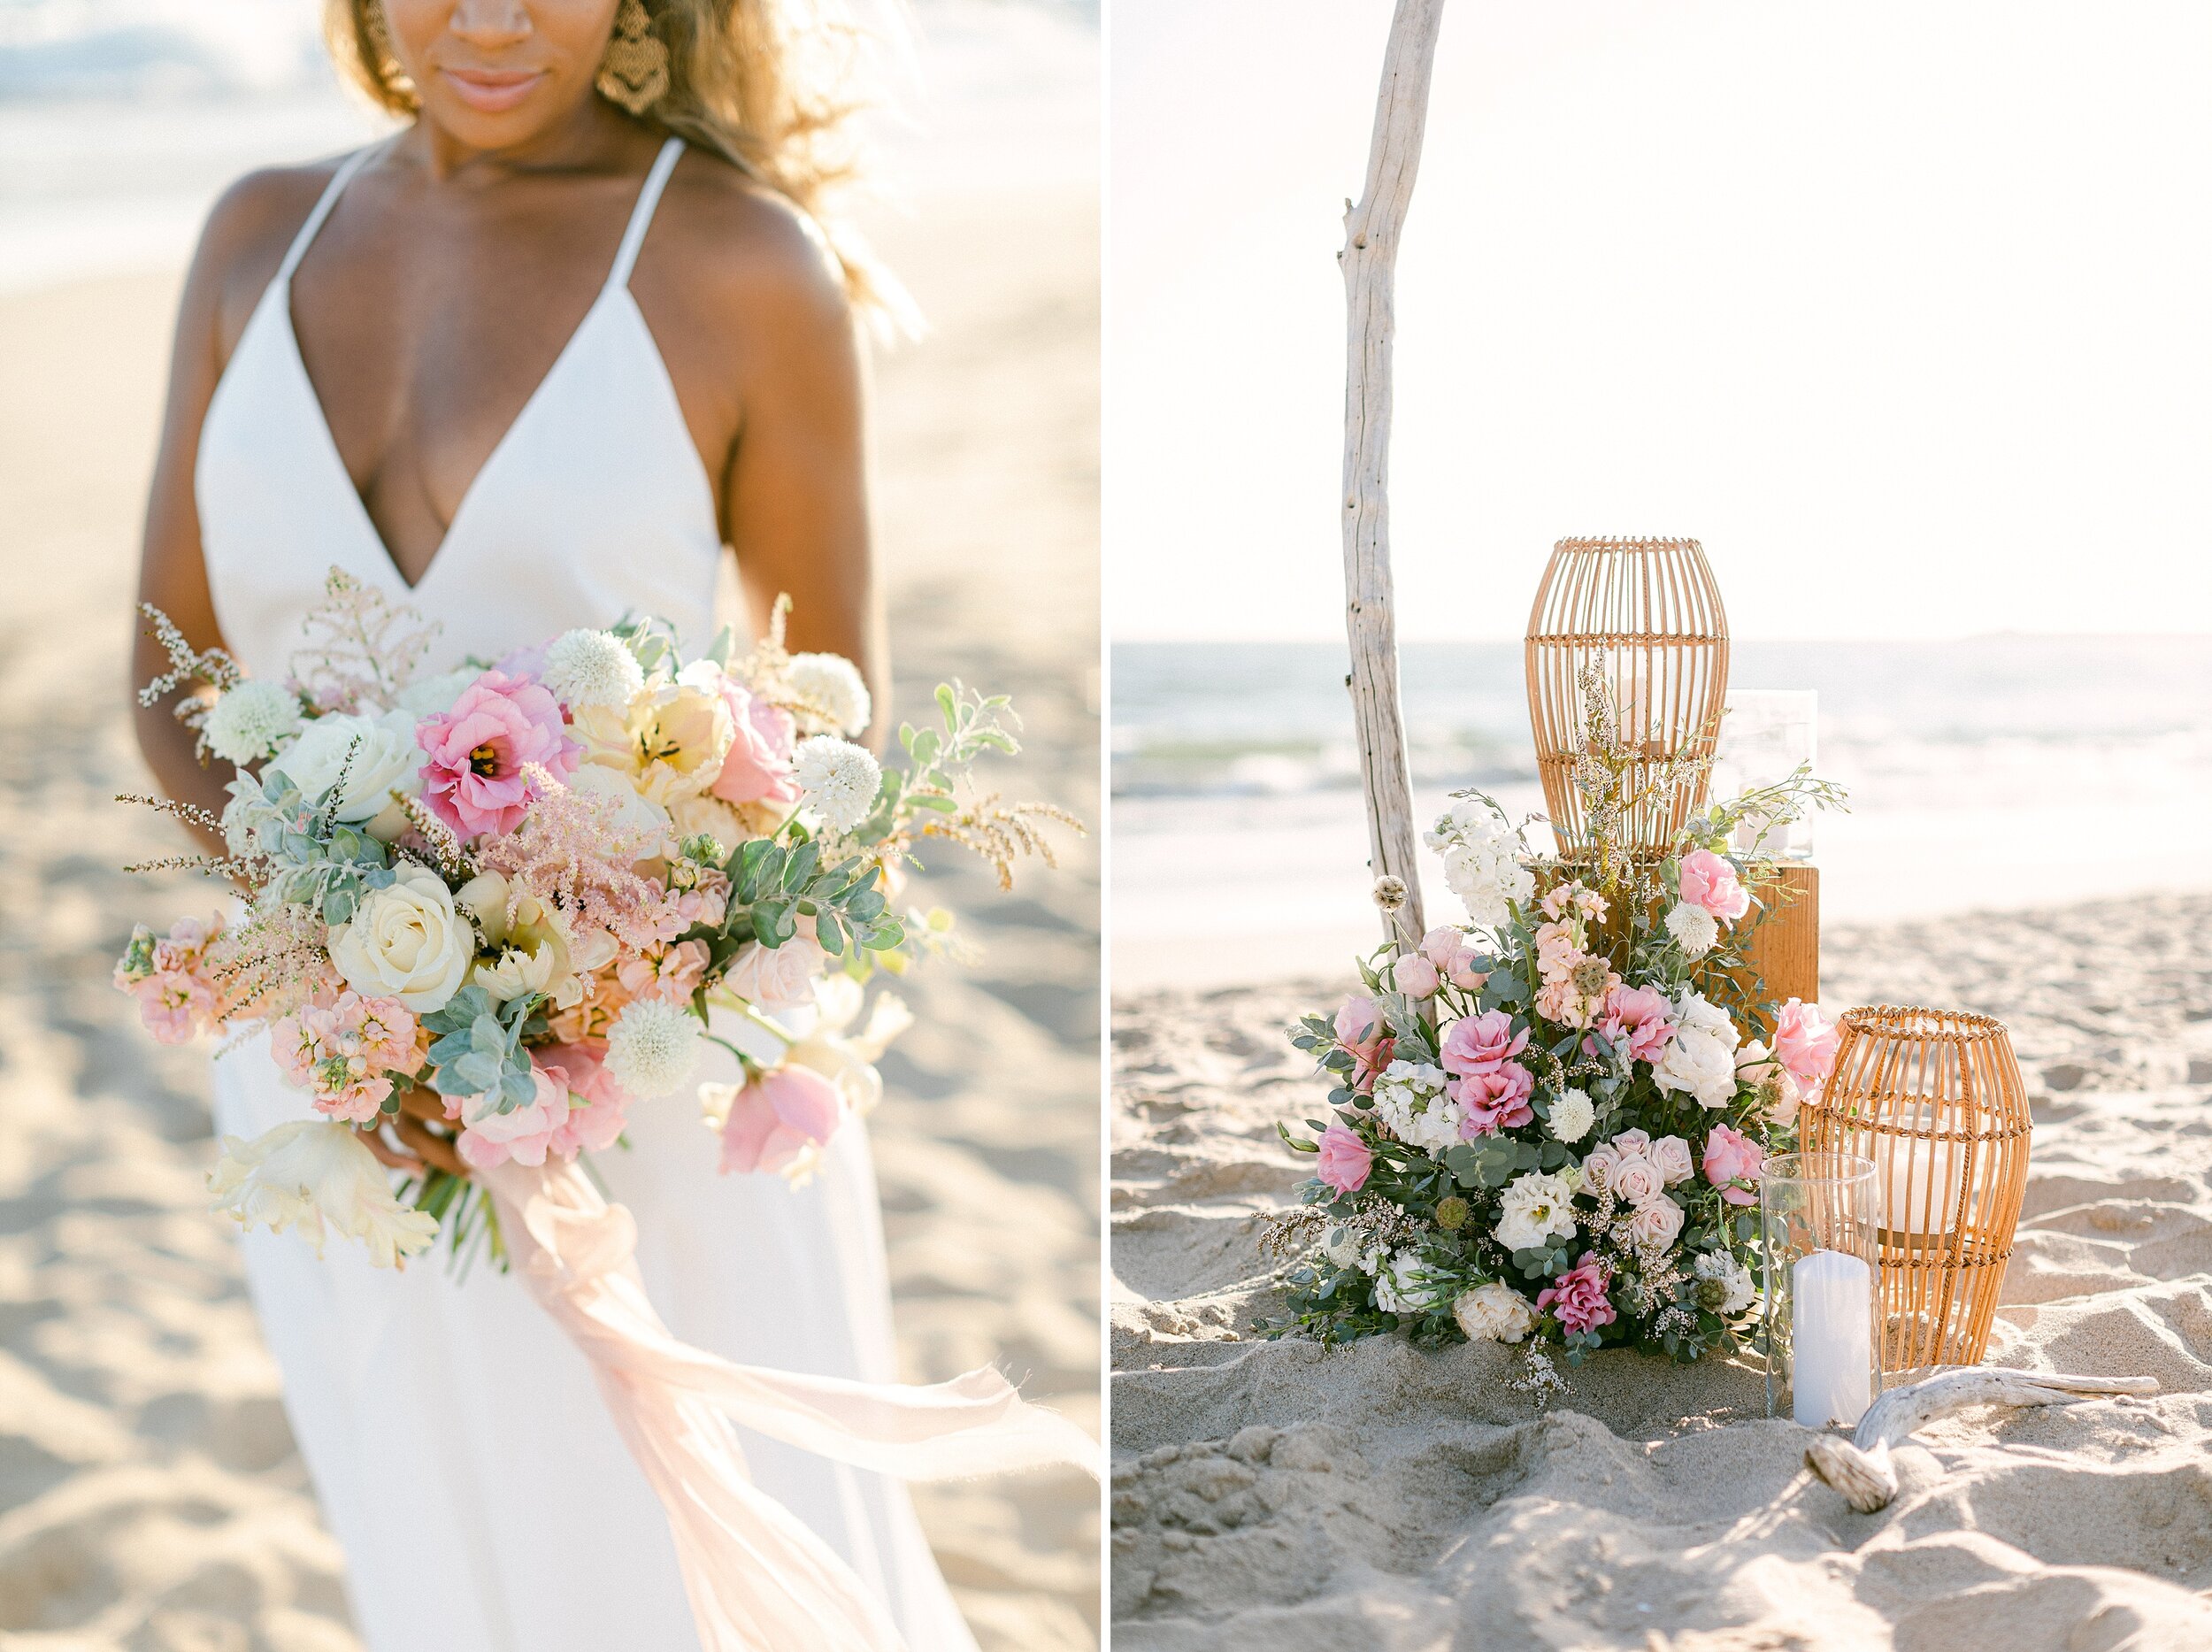 Bride is pictured holding a beautiful springtime bouquet of white, pink and blush florals with eucalyptus greenery.  